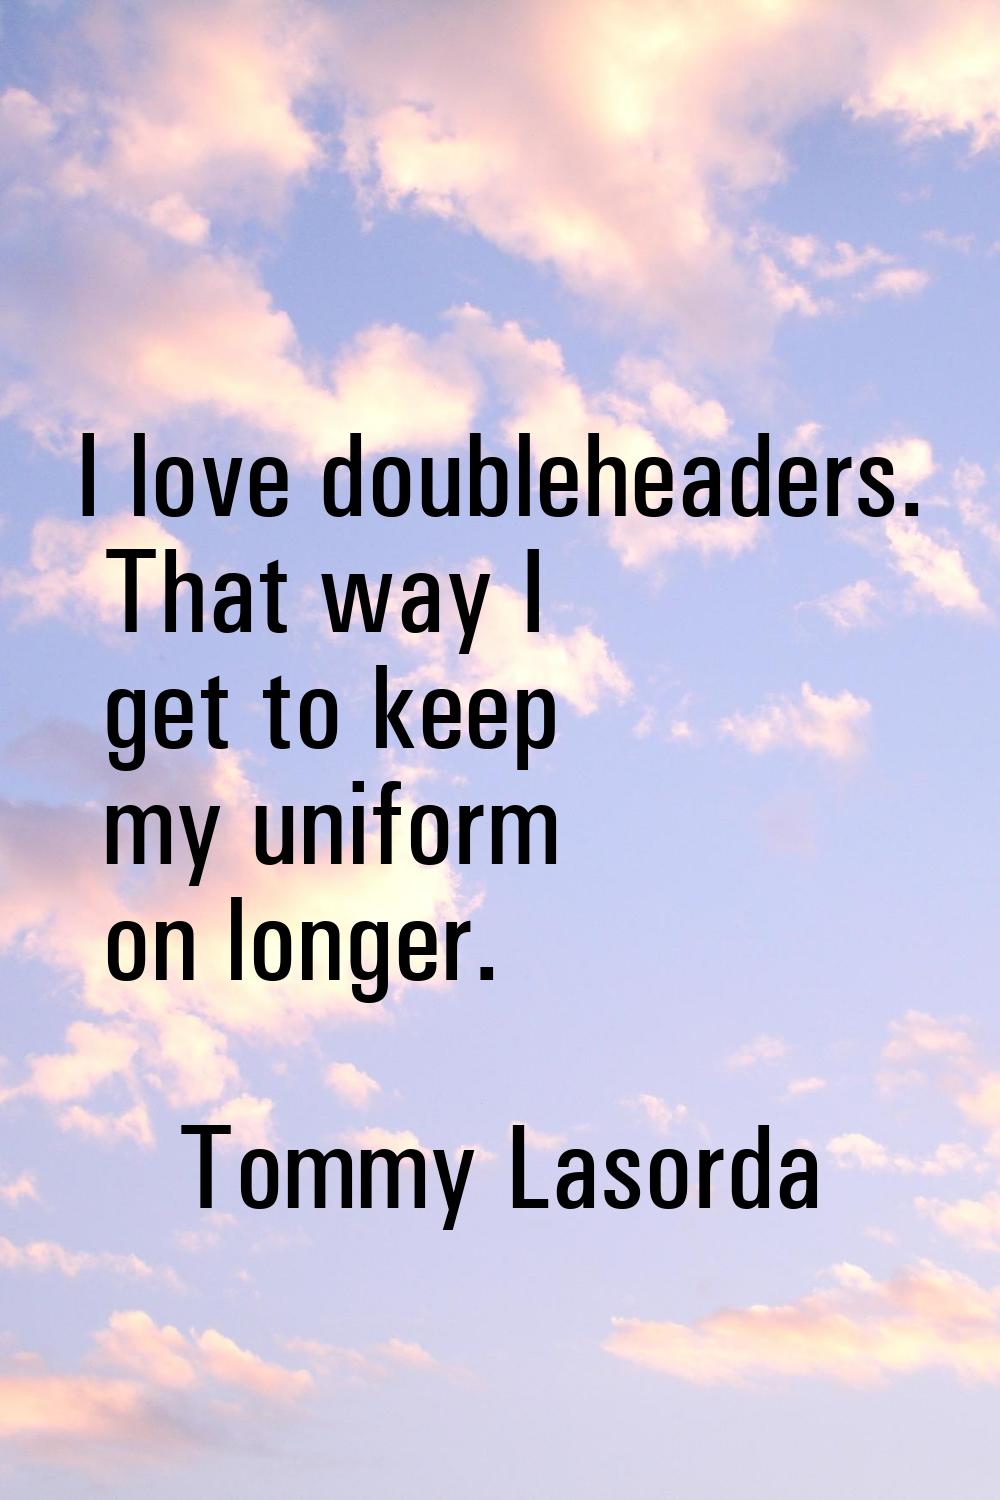 I love doubleheaders. That way I get to keep my uniform on longer.